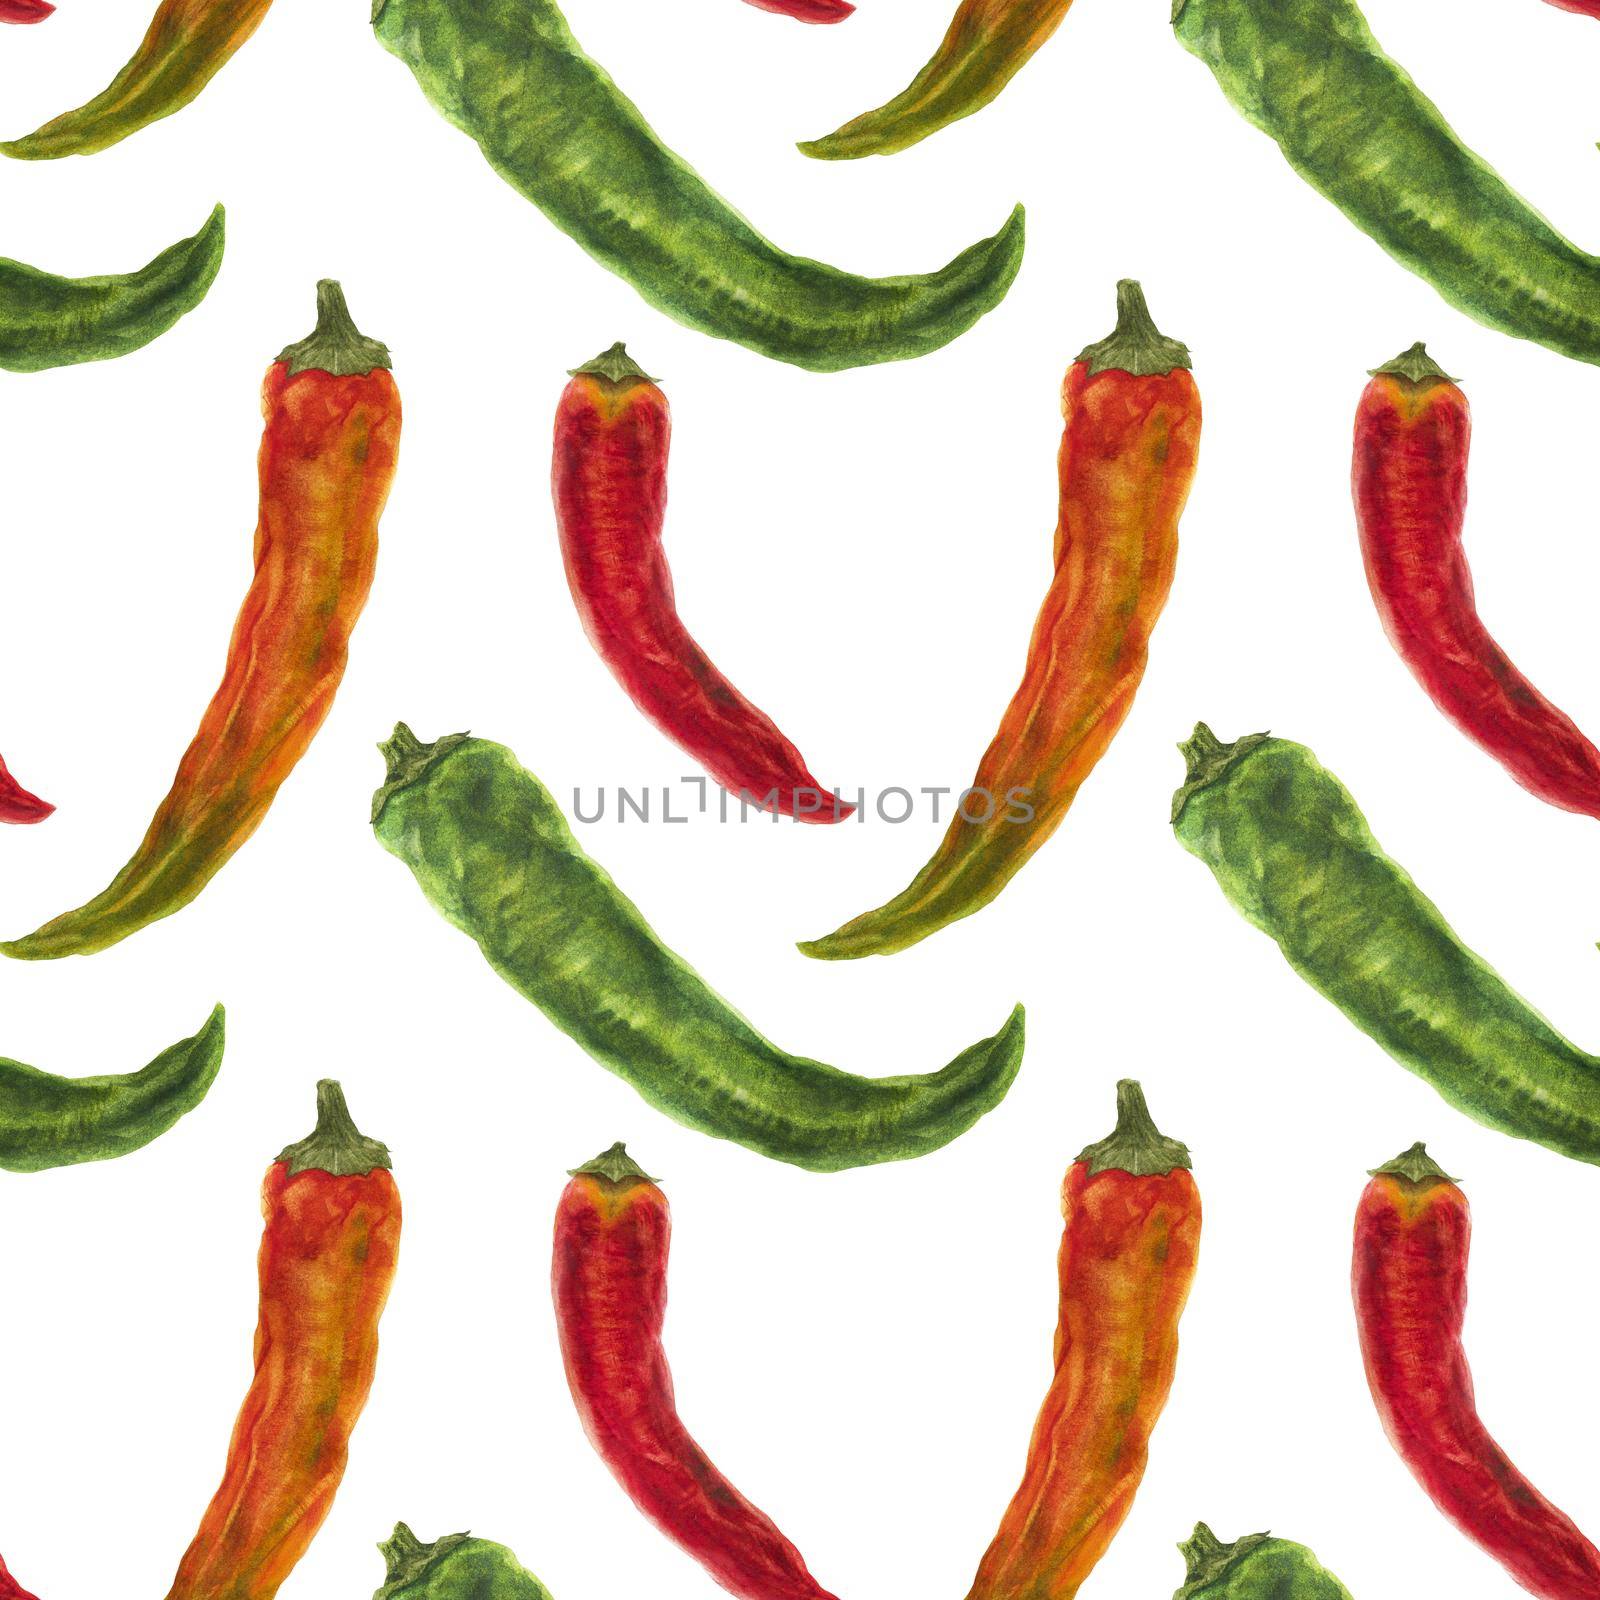 Green, orange and red hot peppers, watercolor seamless pattern by Xeniasnowstorm